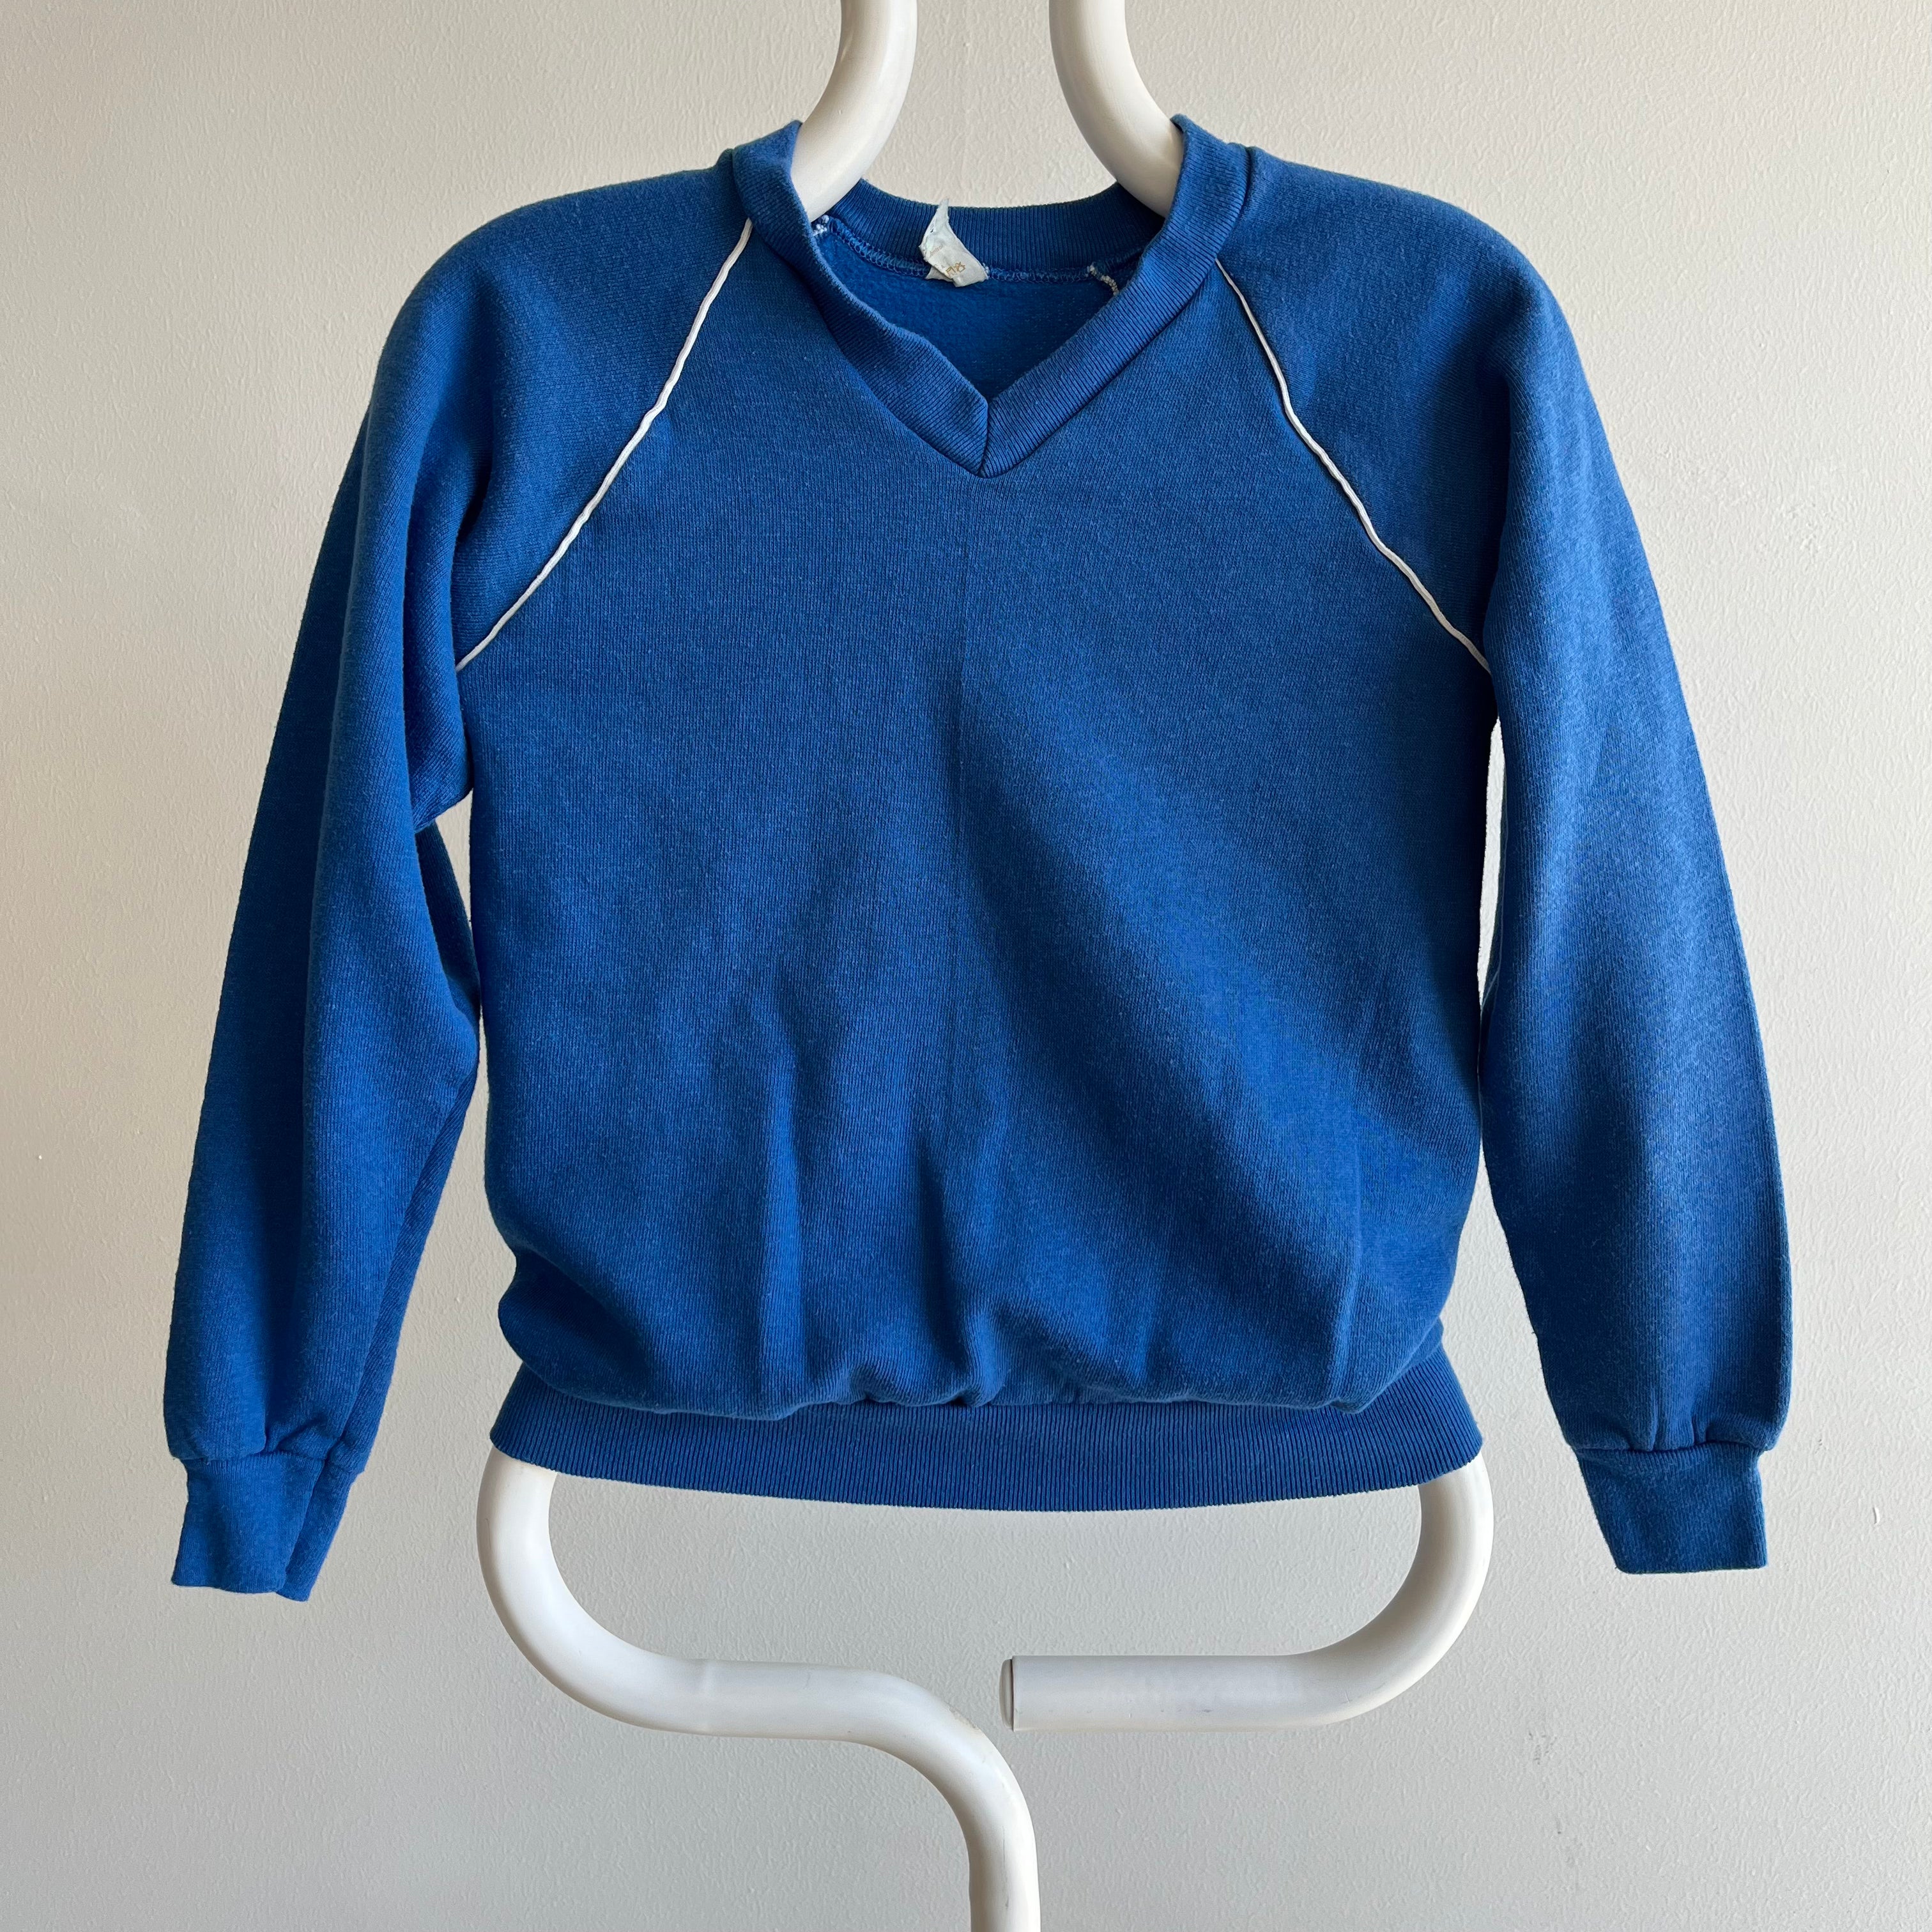 GG 1980s Smaller Sized Never Worn (aside from these pics) V-Neck Sweatshirt with Piping